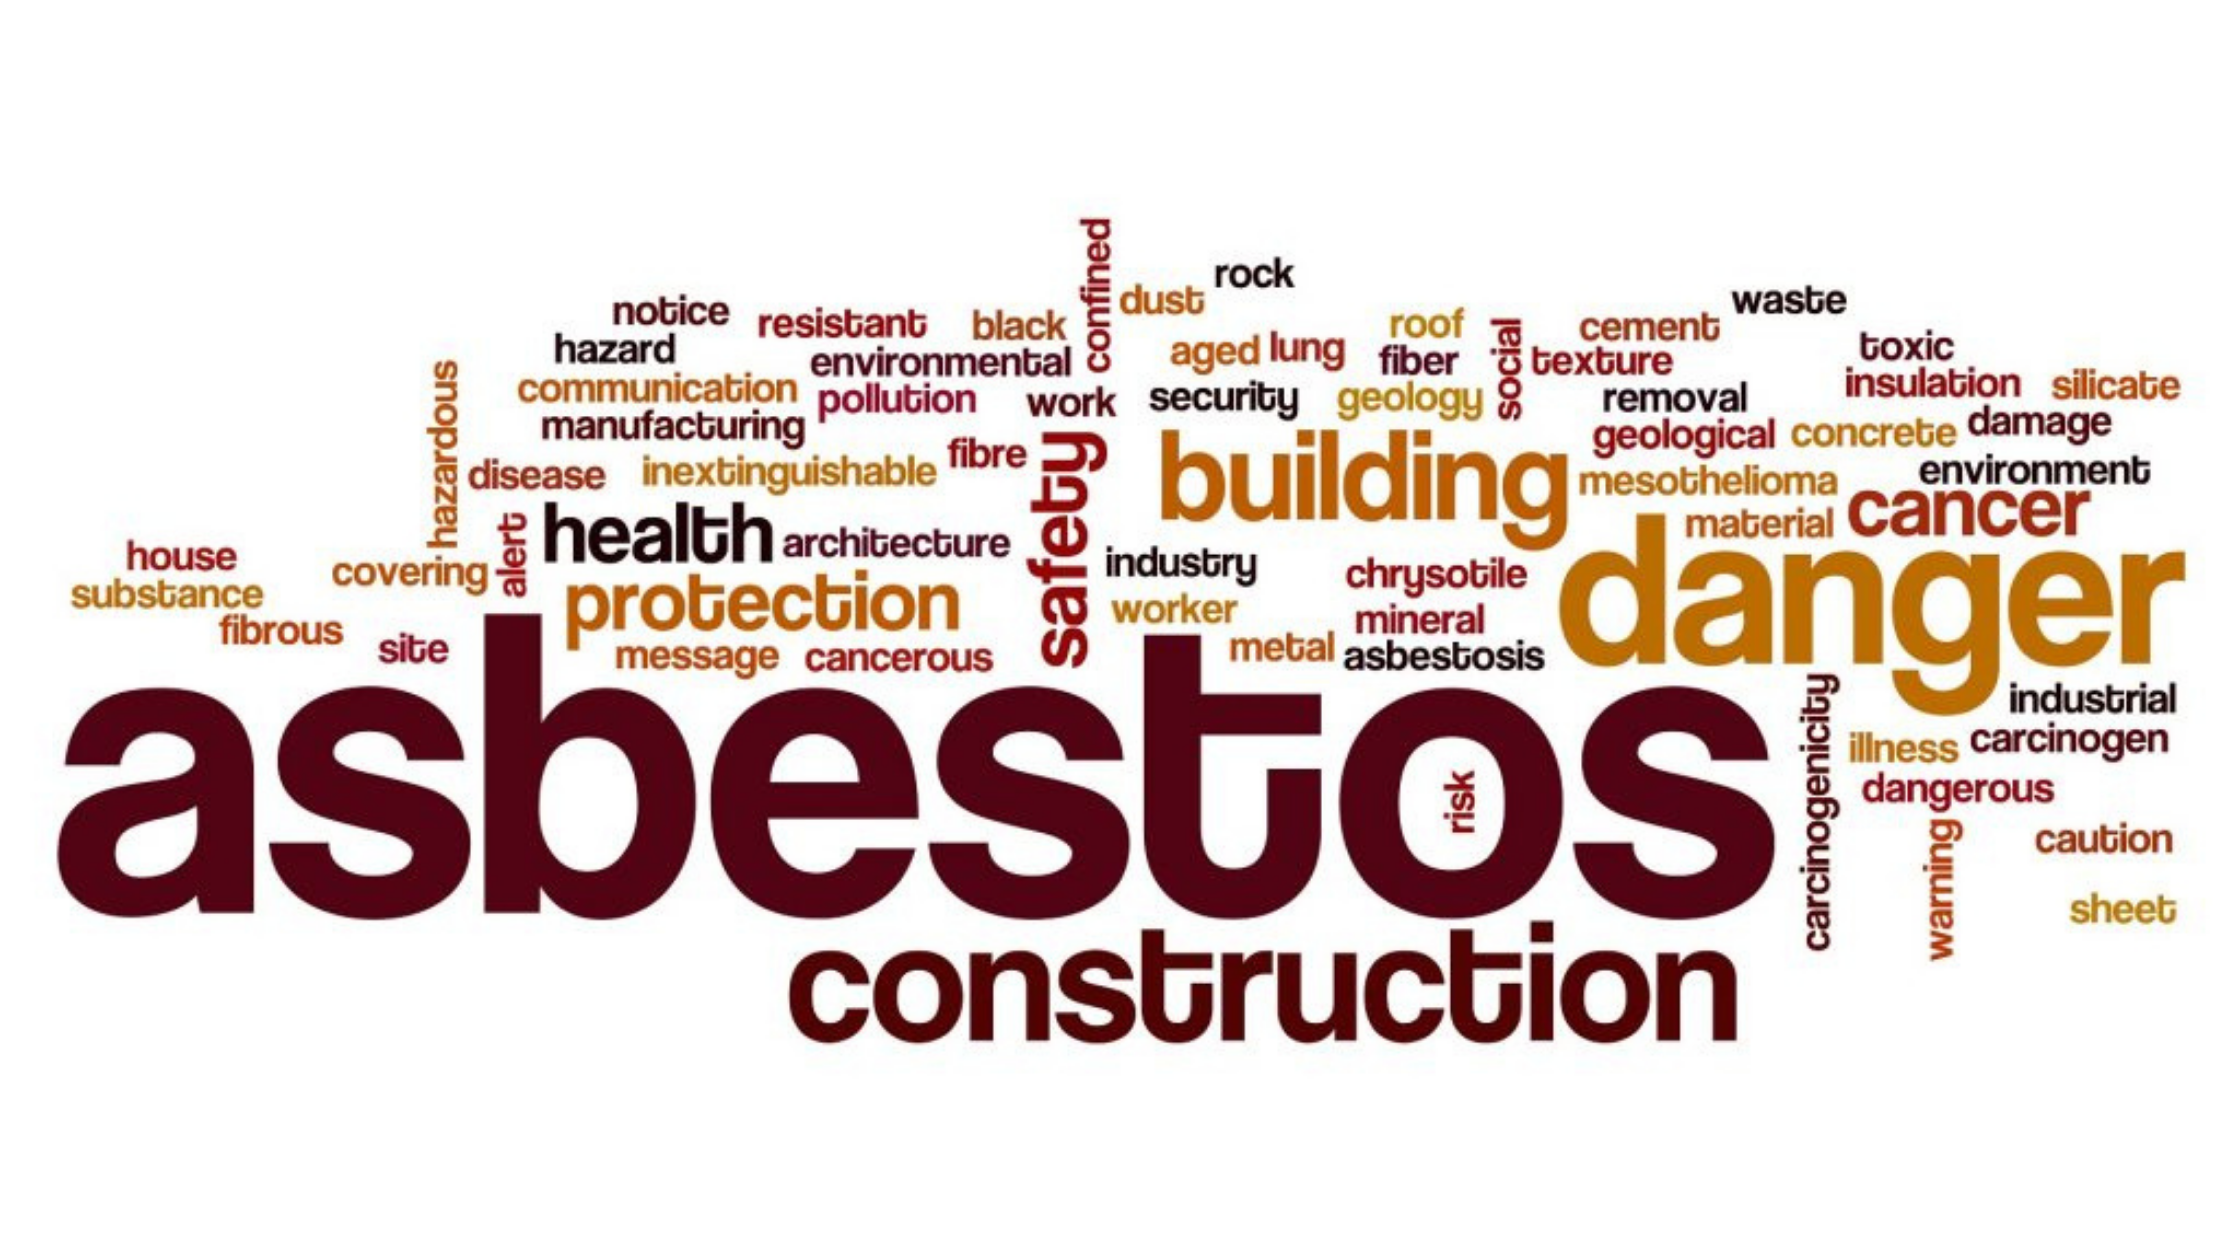 Word cloud showing asbestos risks and associated issues